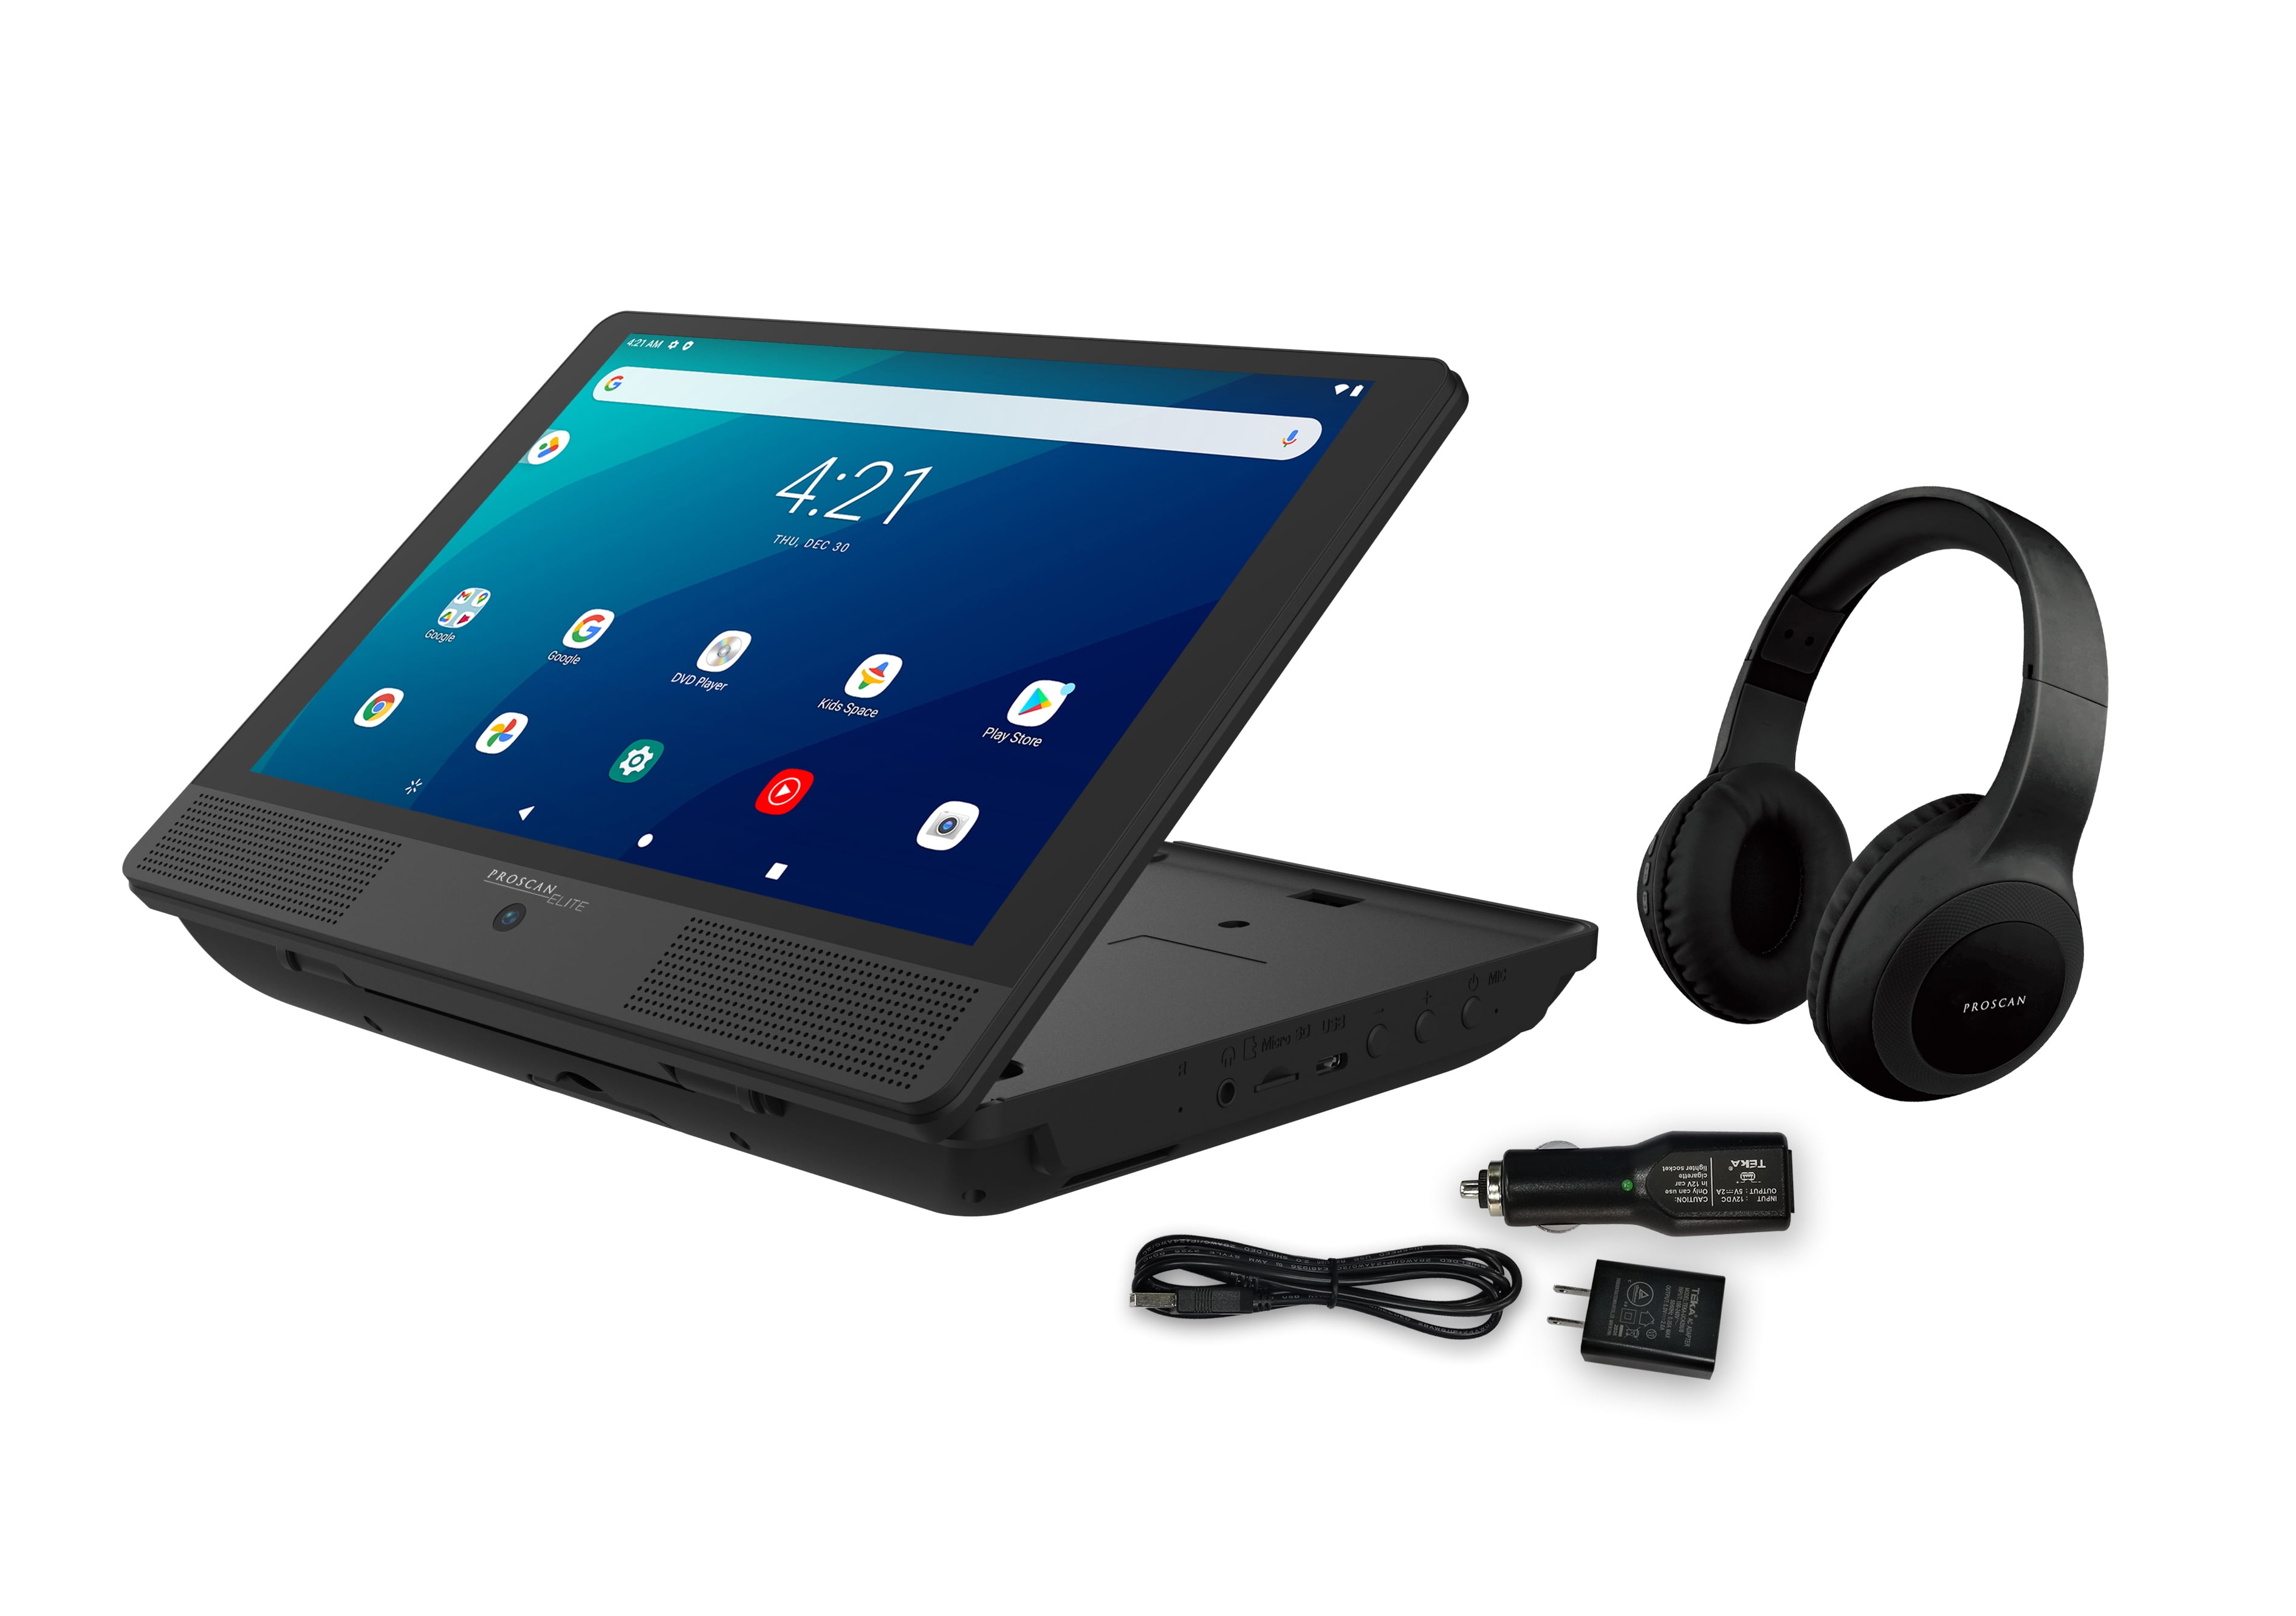 Proscan Elite 10.1" Tablet/Portable DVD Combo Bluetooth Headphone, 2GB/32GB Storage, Android 11 , Includes 2 great Redbox offers inside for free Movies - Walmart.com